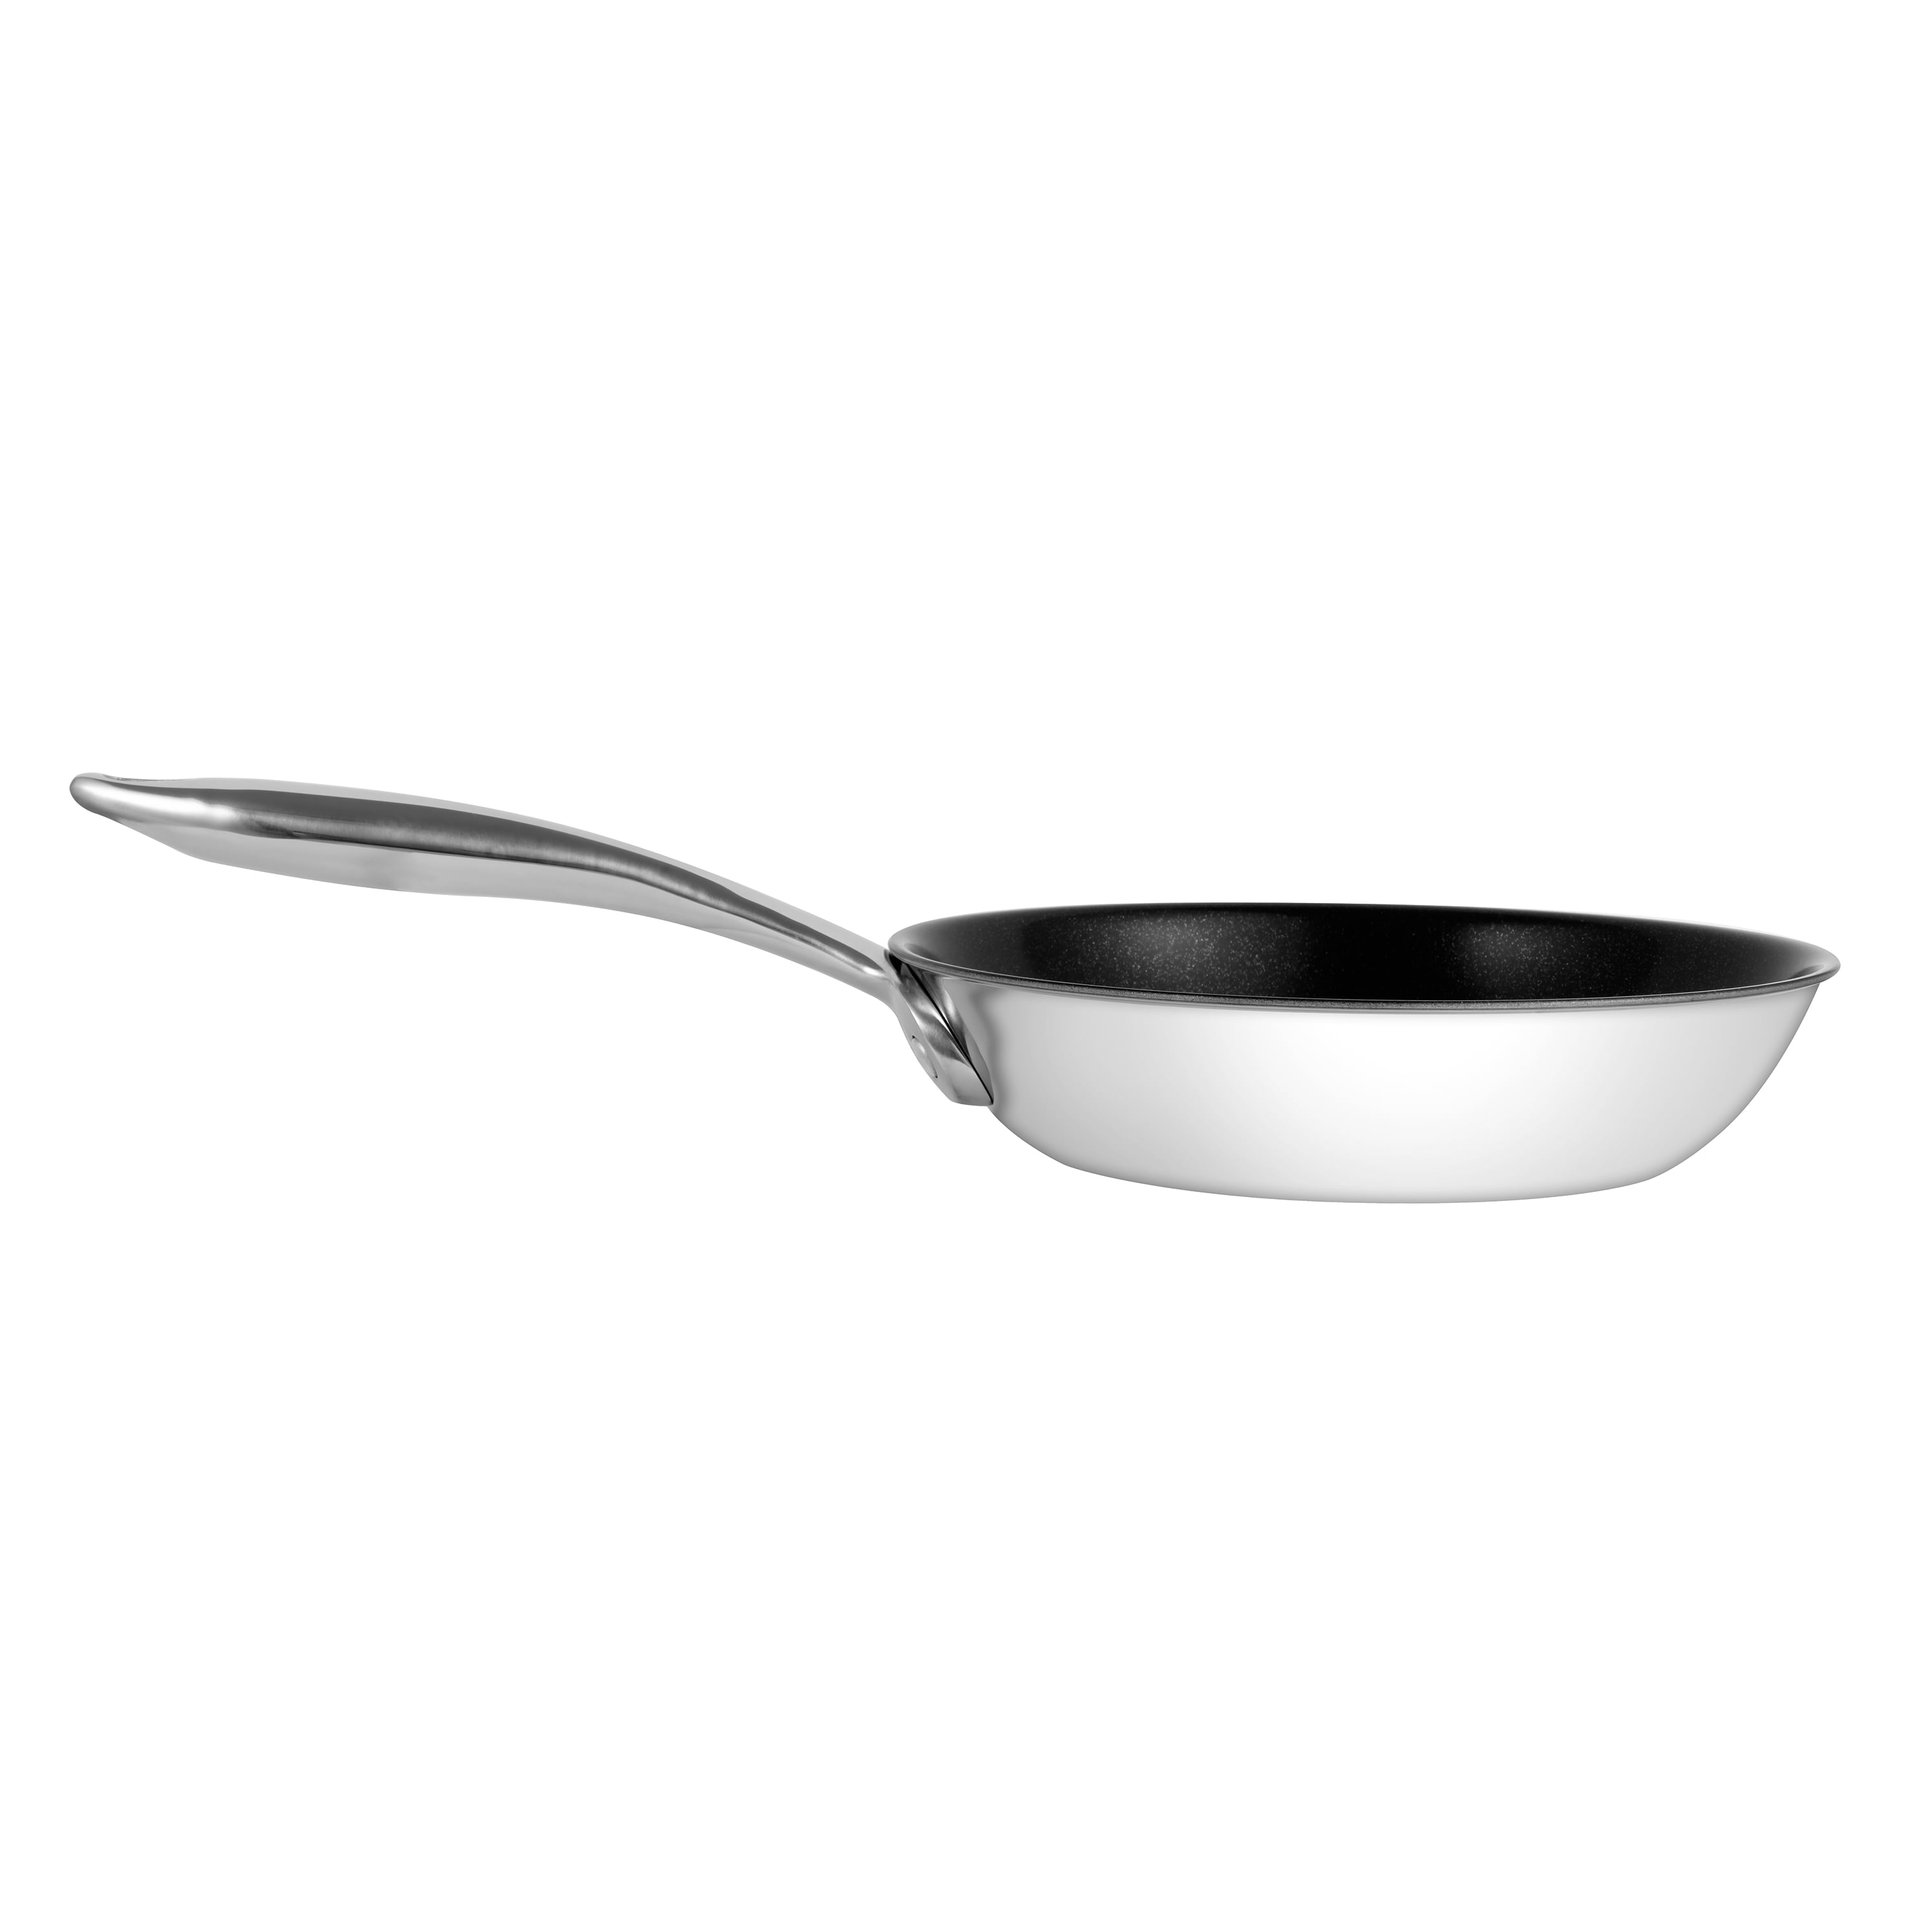 10 (26 cm) Stainless Steel Pan by Ozeri with ETERNA, a 100% PFOA and  APEO-Free Non-Stick Coating